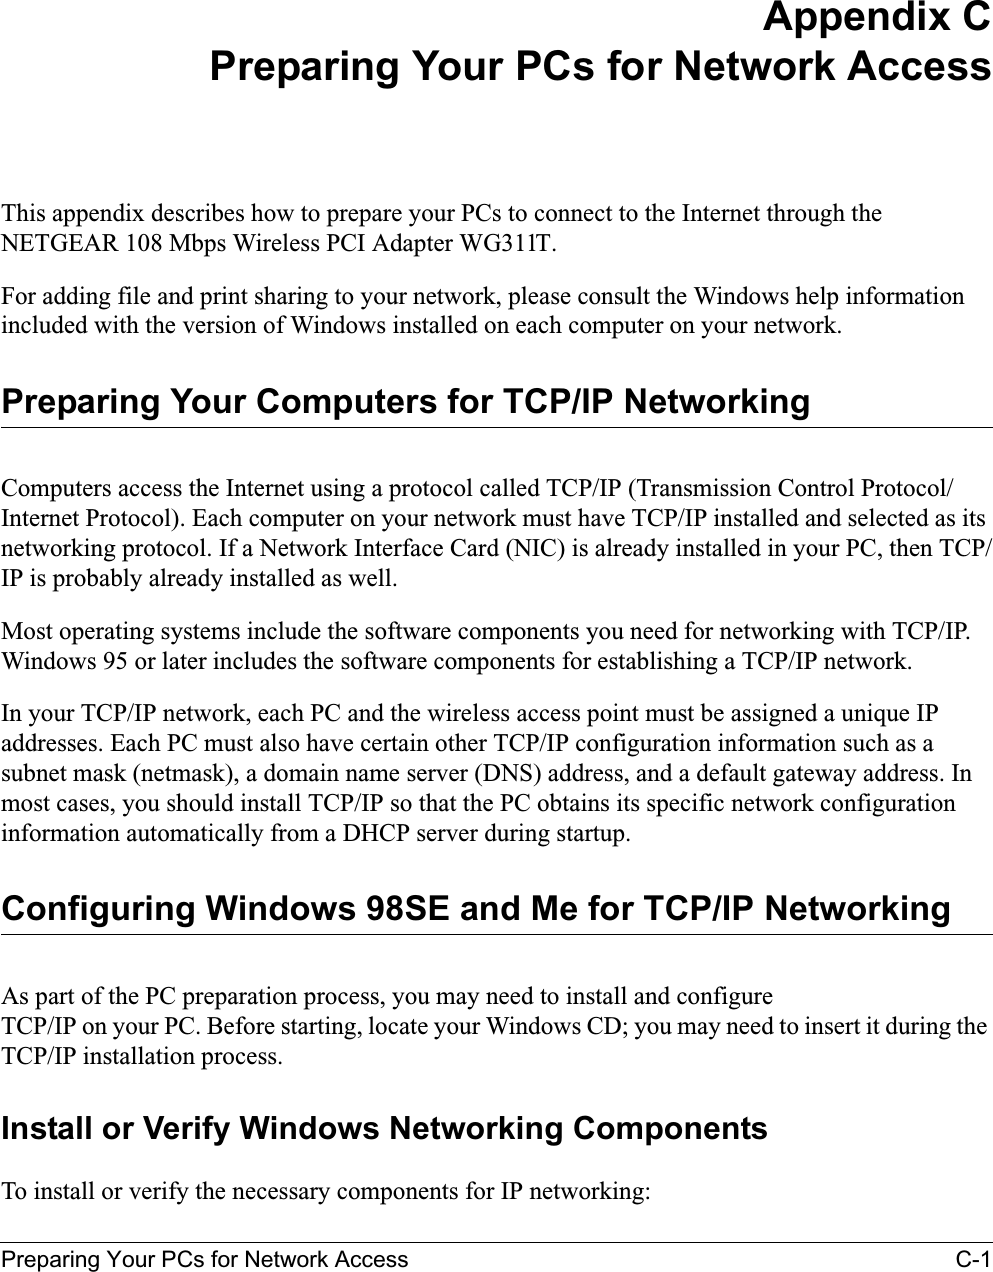 Preparing Your PCs for Network Access C-1Appendix CPreparing Your PCs for Network AccessThis appendix describes how to prepare your PCs to connect to the Internet through the NETGEAR 108 Mbps Wireless PCI Adapter WG311T. For adding file and print sharing to your network, please consult the Windows help information included with the version of Windows installed on each computer on your network.Preparing Your Computers for TCP/IP NetworkingComputers access the Internet using a protocol called TCP/IP (Transmission Control Protocol/Internet Protocol). Each computer on your network must have TCP/IP installed and selected as its networking protocol. If a Network Interface Card (NIC) is already installed in your PC, then TCP/IP is probably already installed as well.Most operating systems include the software components you need for networking with TCP/IP. Windows 95 or later includes the software components for establishing a TCP/IP network. In your TCP/IP network, each PC and the wireless access point must be assigned a unique IP addresses. Each PC must also have certain other TCP/IP configuration information such as a subnet mask (netmask), a domain name server (DNS) address, and a default gateway address. In most cases, you should install TCP/IP so that the PC obtains its specific network configuration information automatically from a DHCP server during startup. Configuring Windows 98SE and Me for TCP/IP NetworkingAs part of the PC preparation process, you may need to install and configure TCP/IP on your PC. Before starting, locate your Windows CD; you may need to insert it during the TCP/IP installation process.Install or Verify Windows Networking ComponentsTo install or verify the necessary components for IP networking: